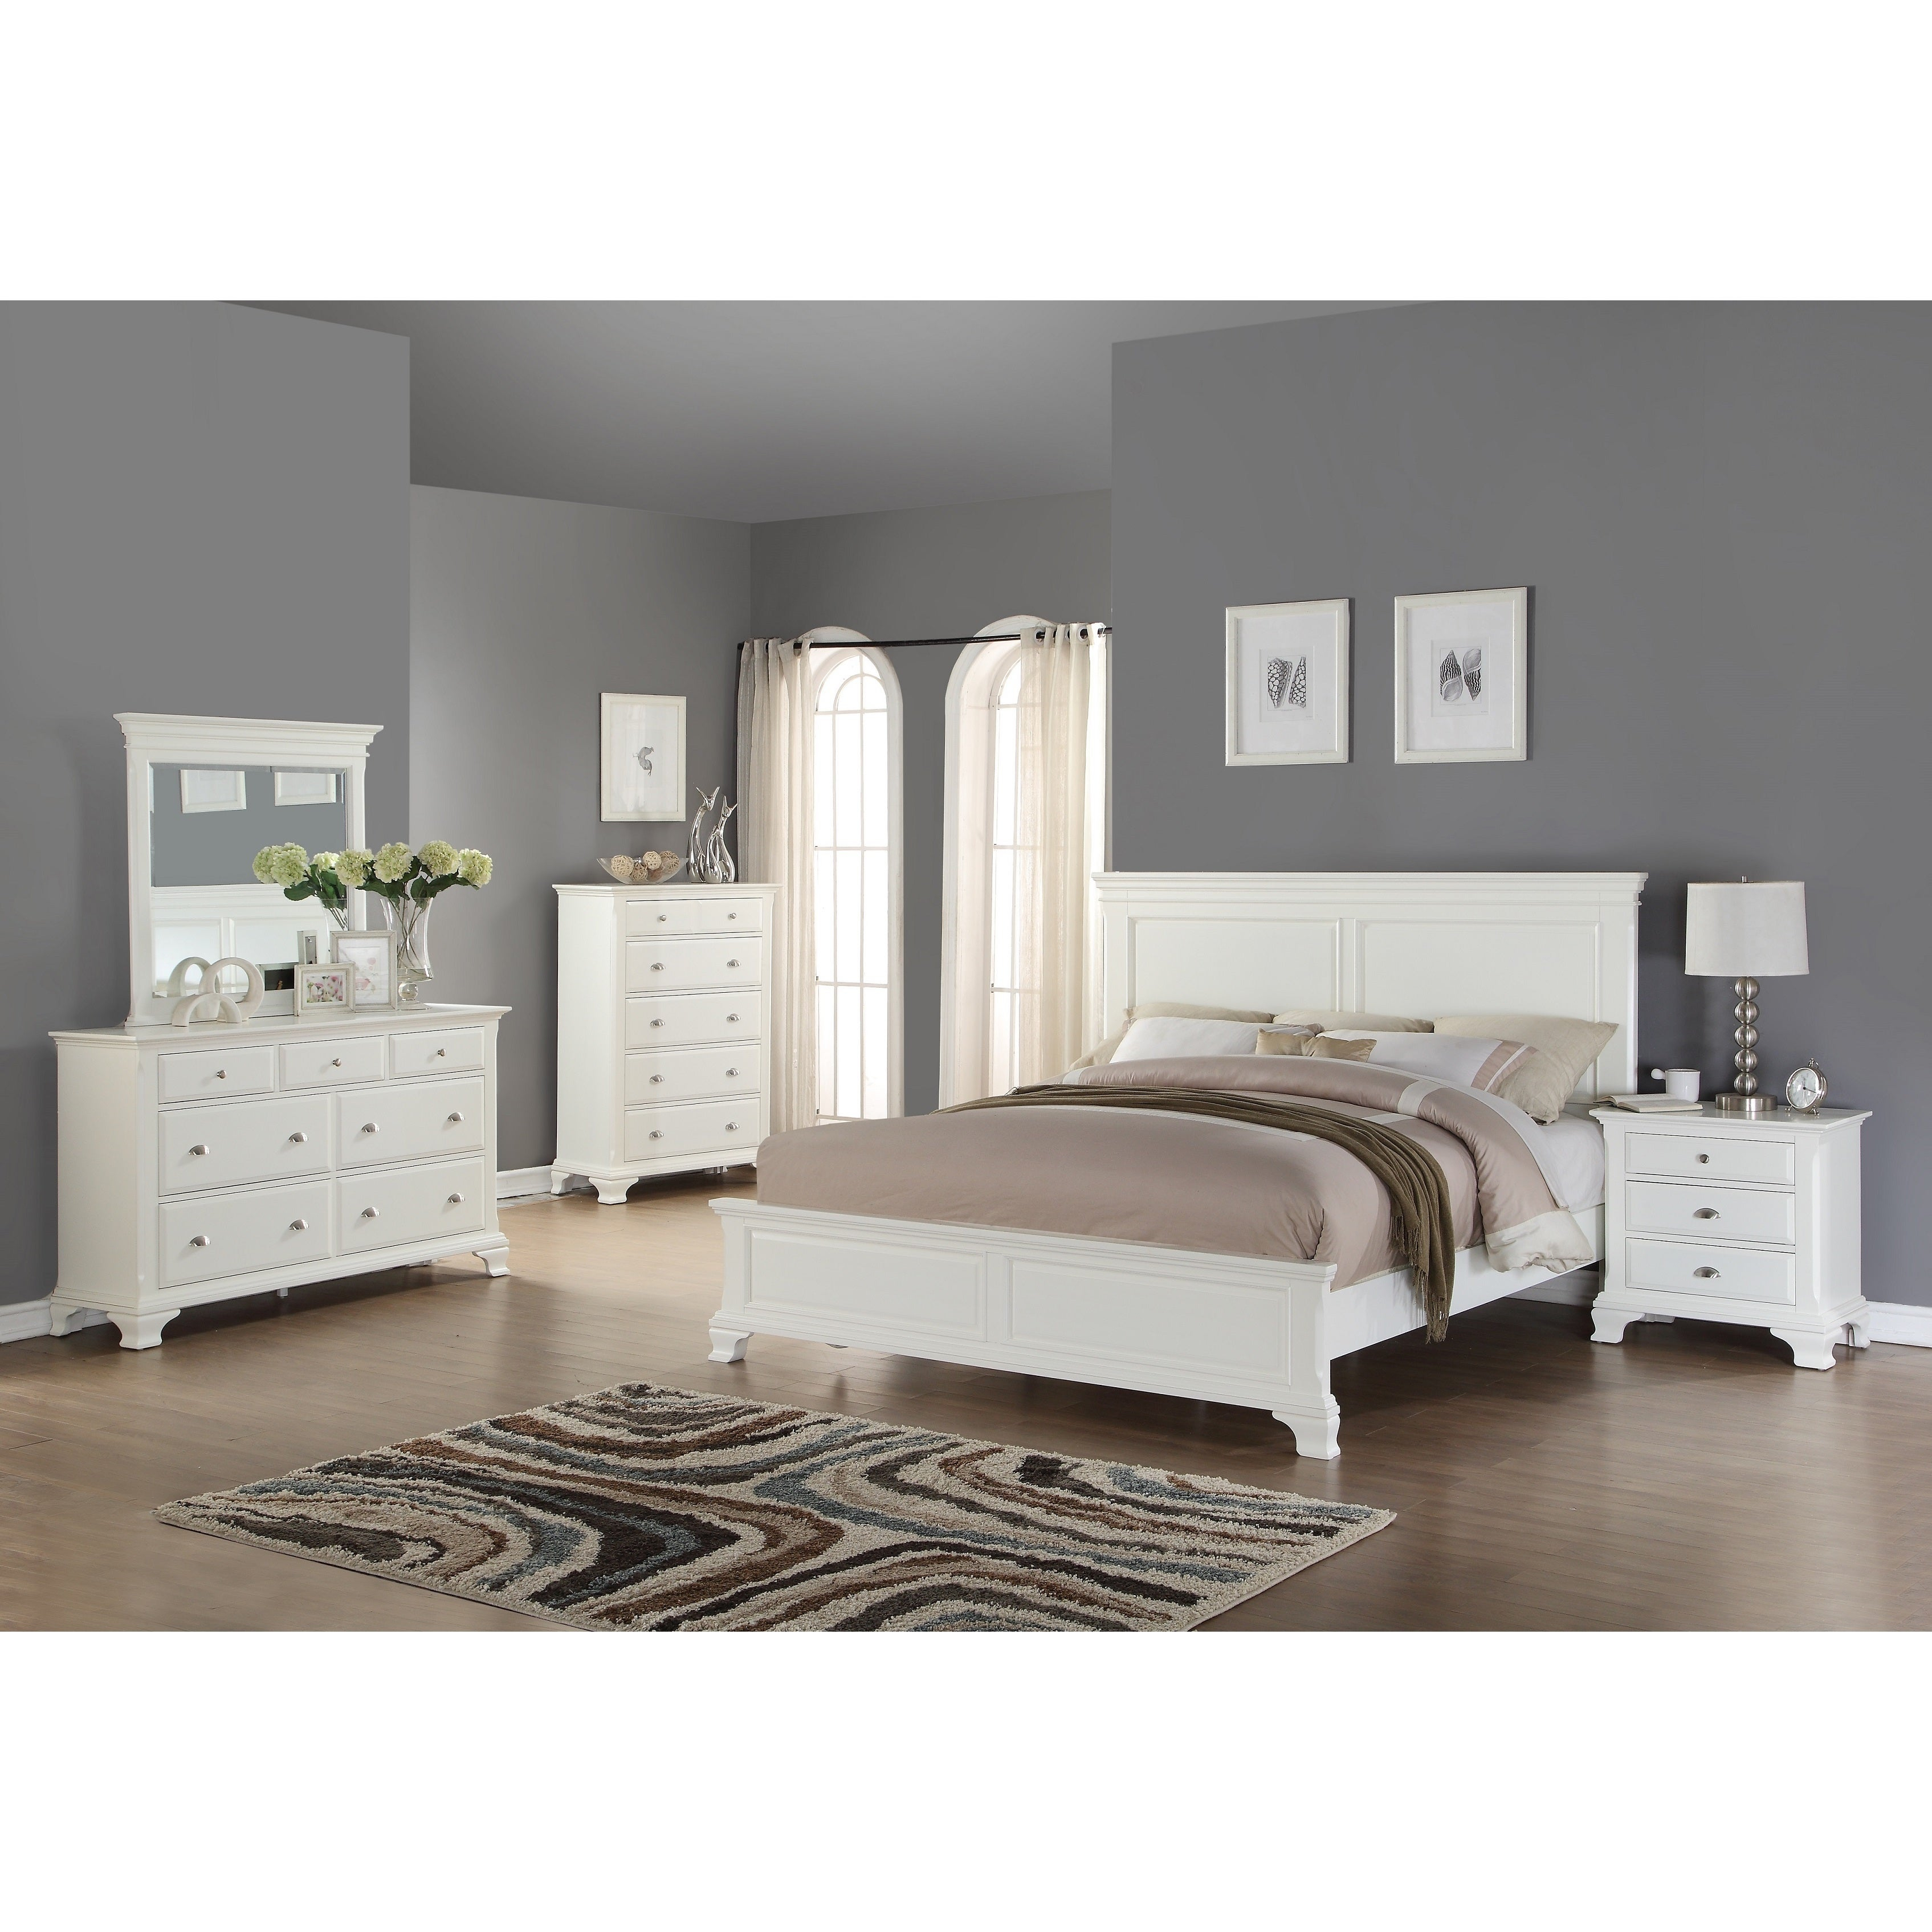 Laveno 012 White Wood Bedroom Furniture Set Includes Queen Bed Dresser Mirror Night Stand And Chest throughout proportions 3390 X 3390